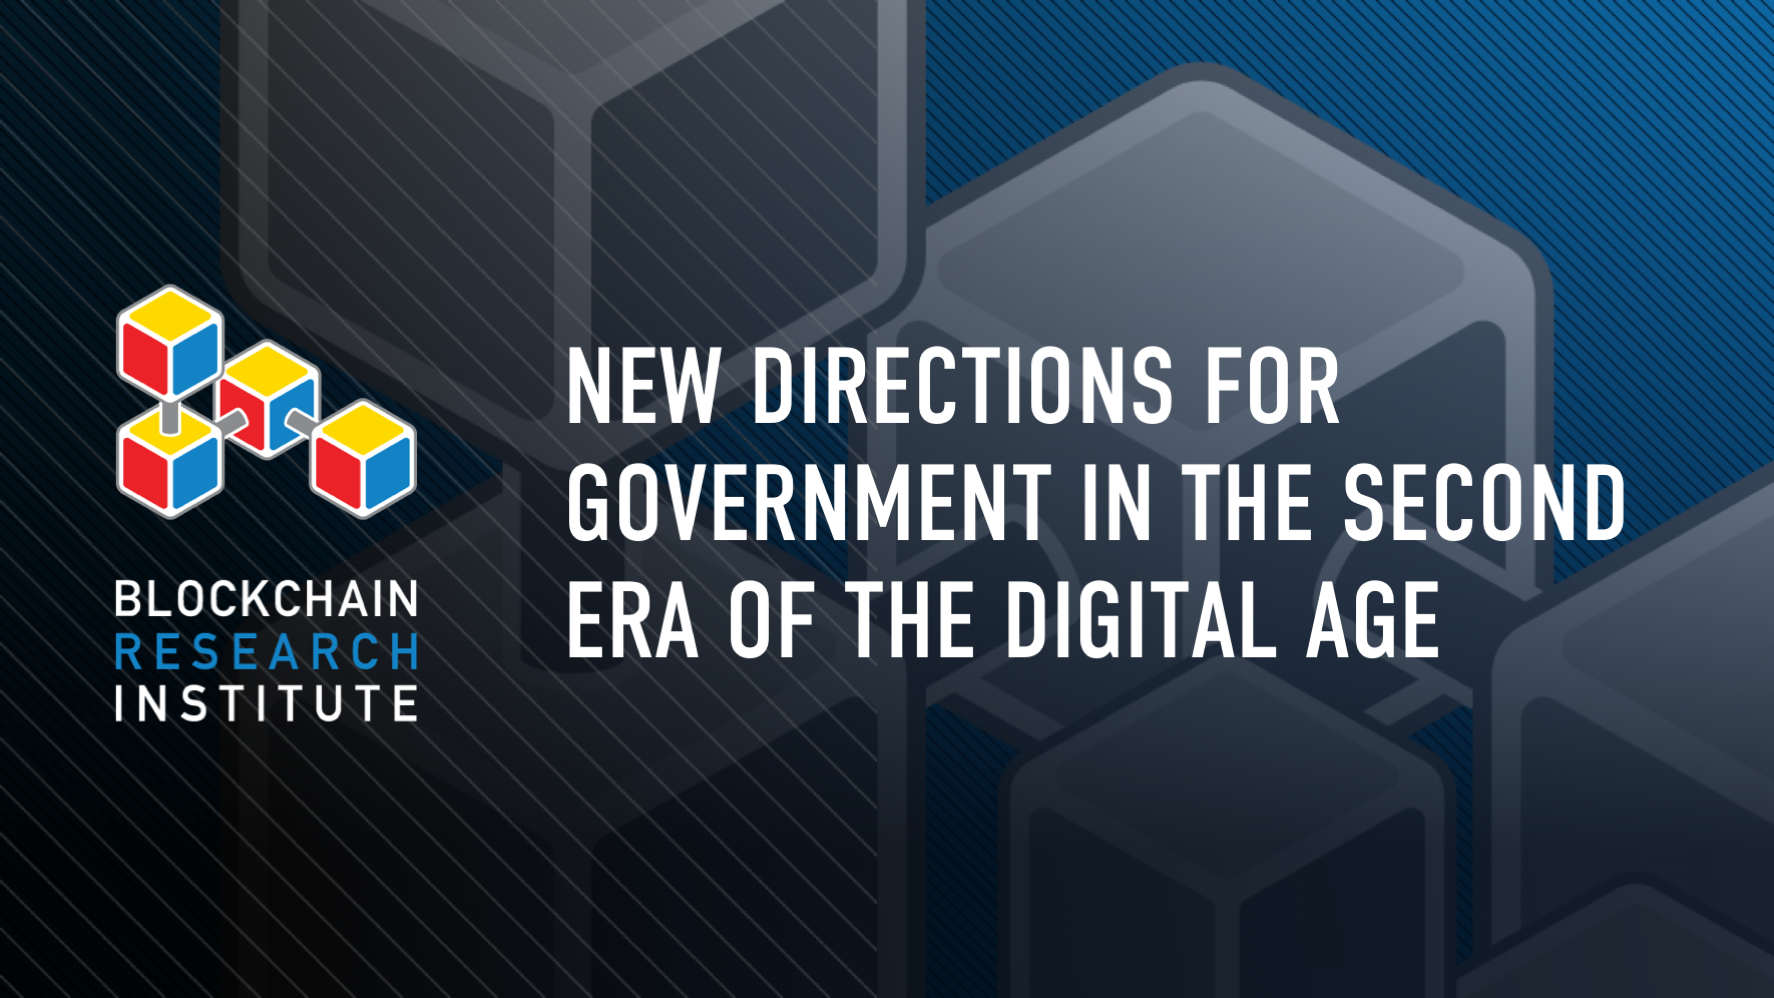 Blockchain Research Institute Recommends Five Digital Priorities to Biden Administration